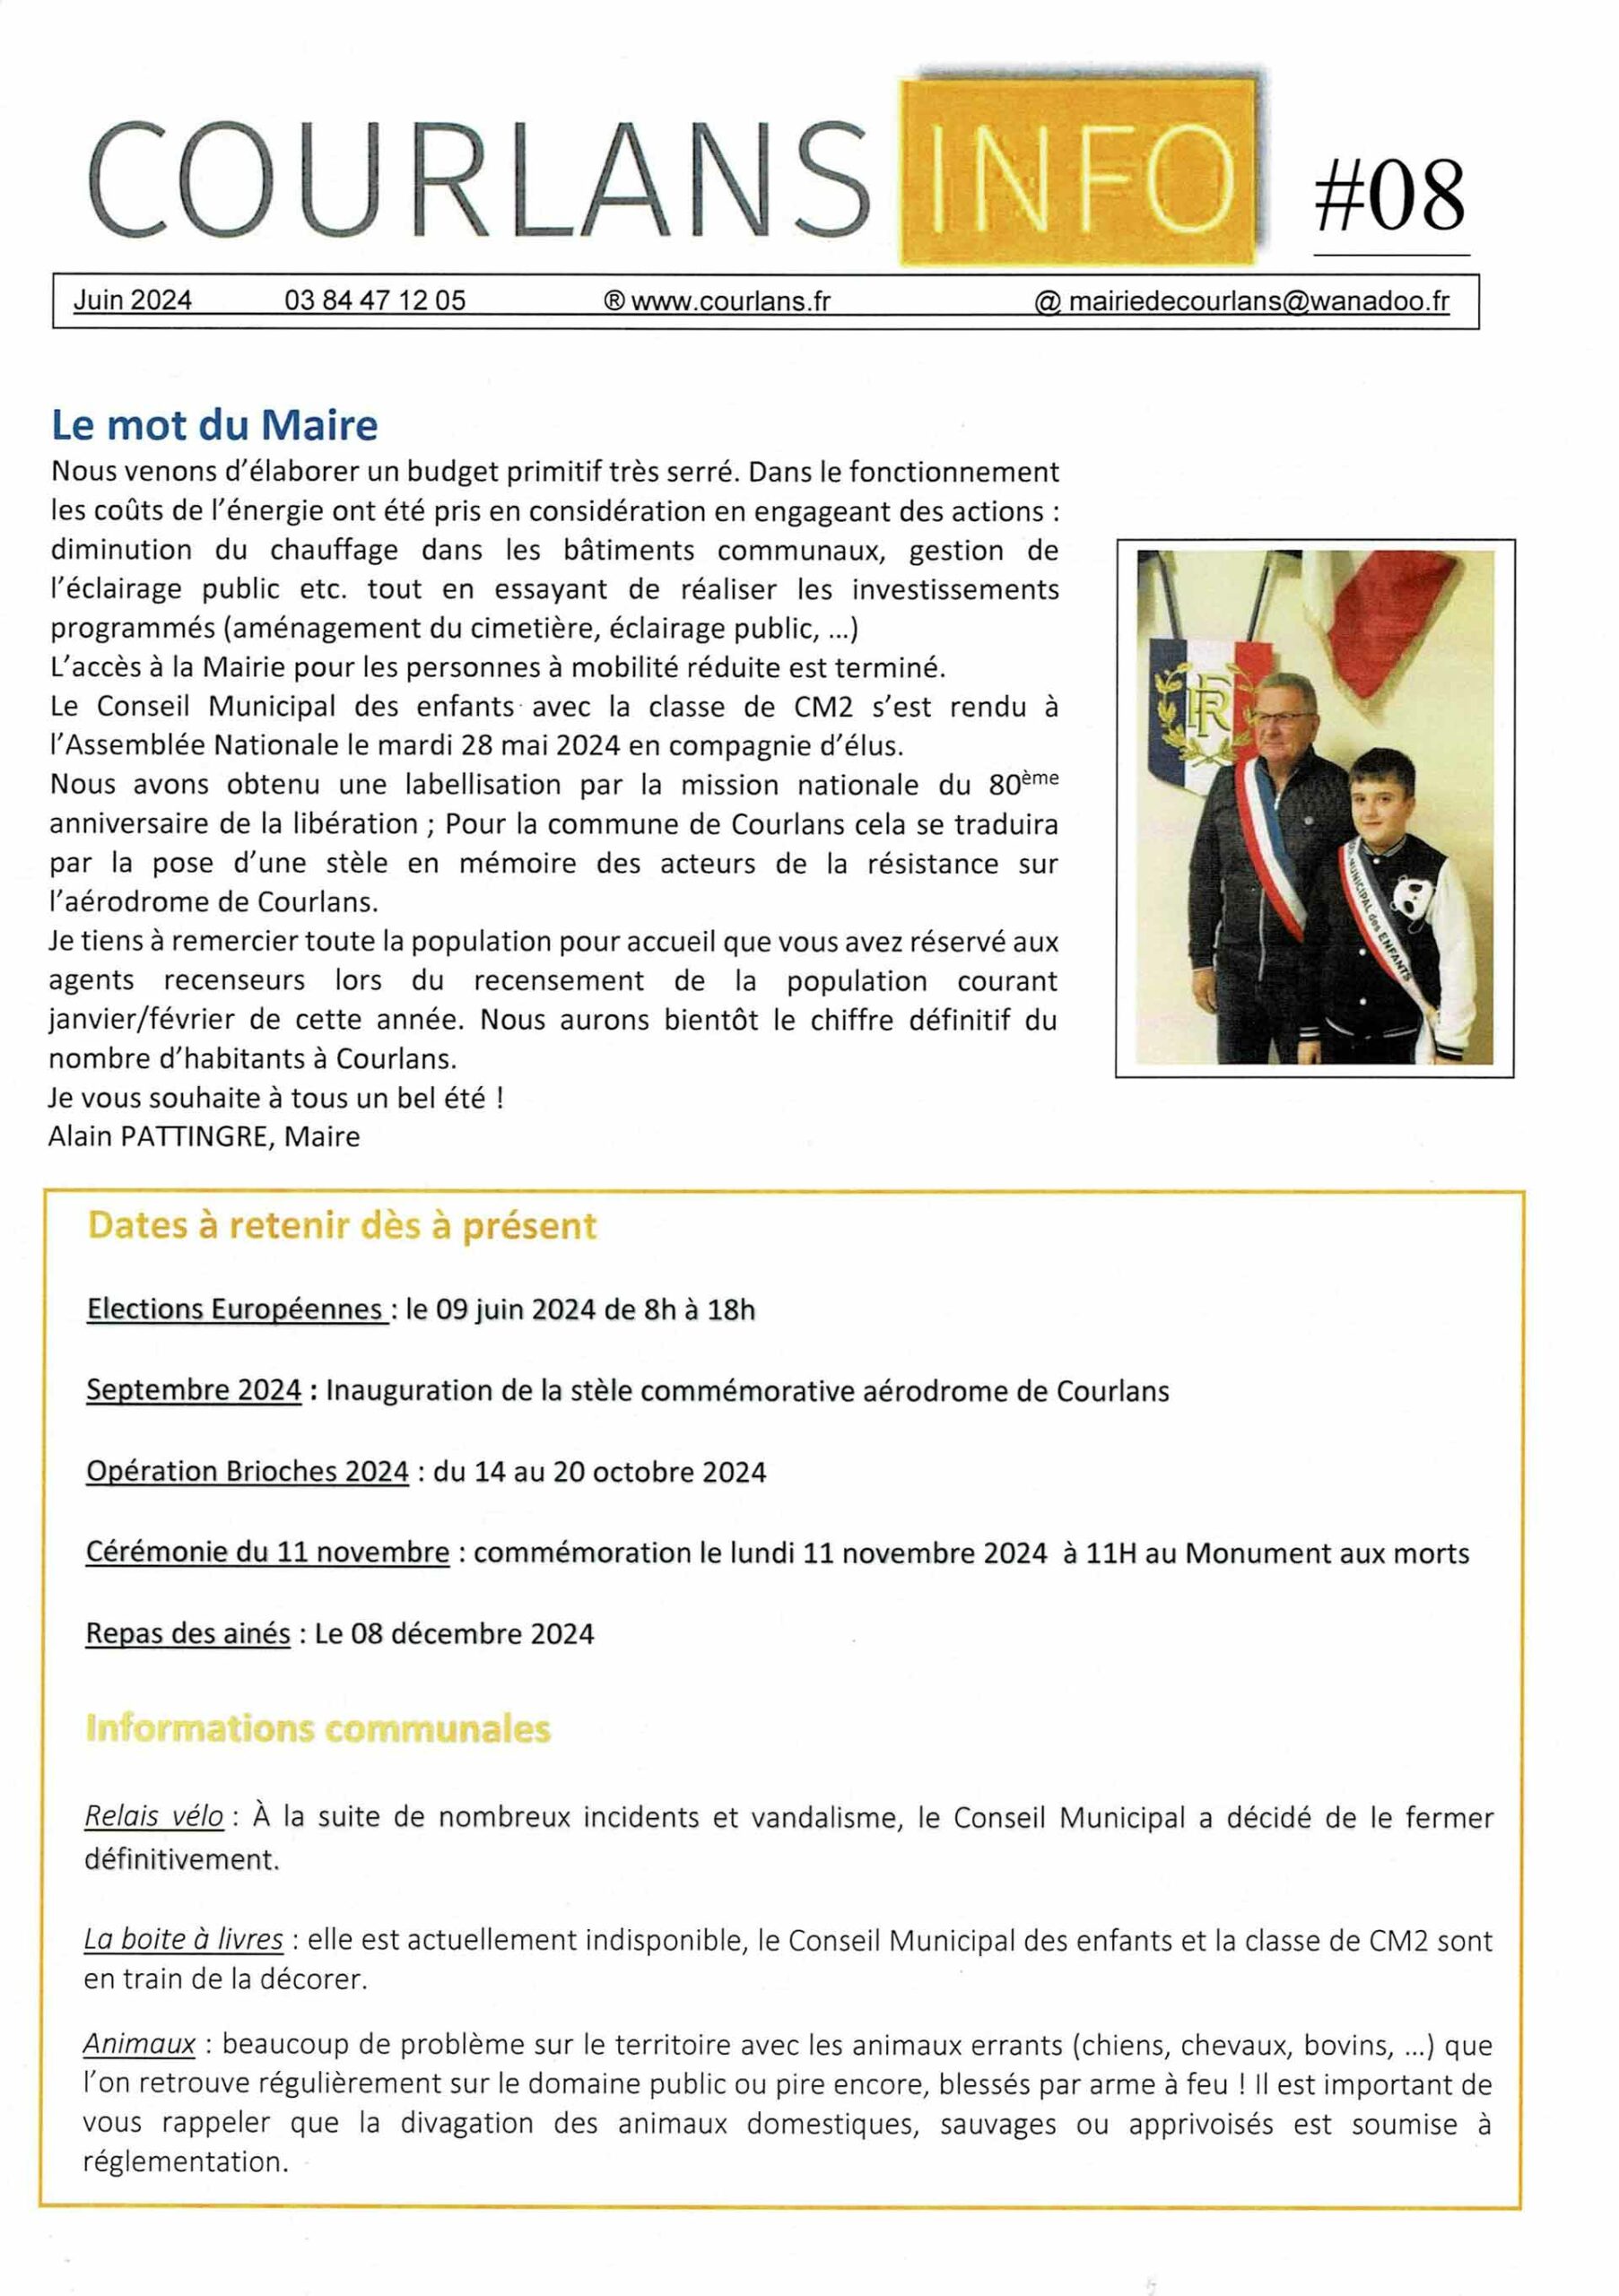 Courlans-info-#08